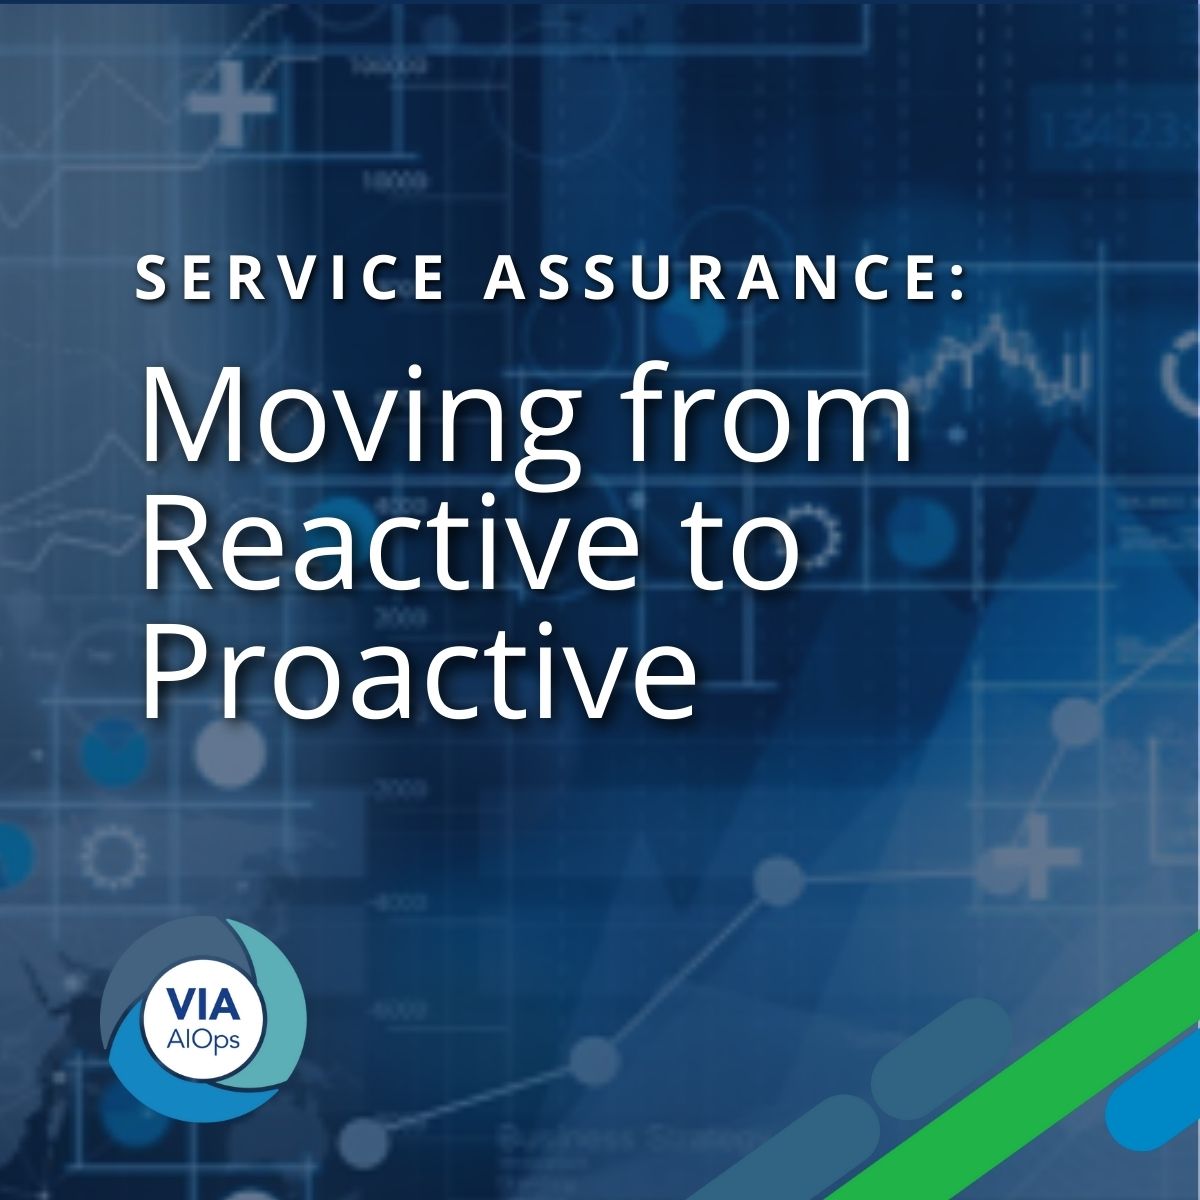 Service assurance for AIOps